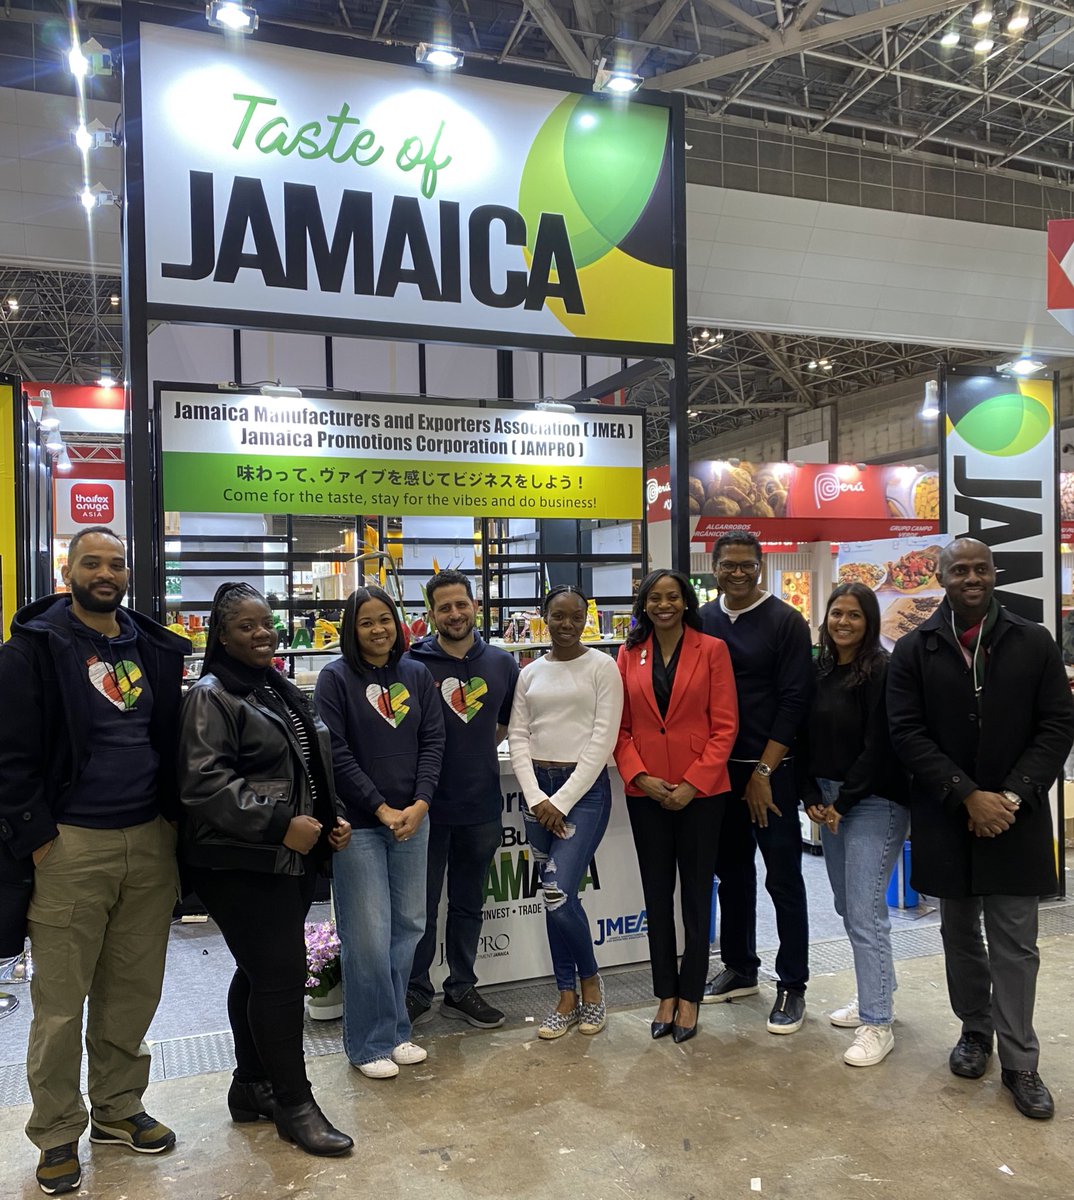 Team Jamaica is ready for Asia’s biggest food & bev show in Japan @foodex_j thanks to inspirational leadership from Her Excellency @ShornaKayR & Paul “fix it” Peart. Jamaica 🇯🇲 is proudly on the global stage, building our export @HillAubyn @Jamprocorp @theJMEA_ @kaminajsmith